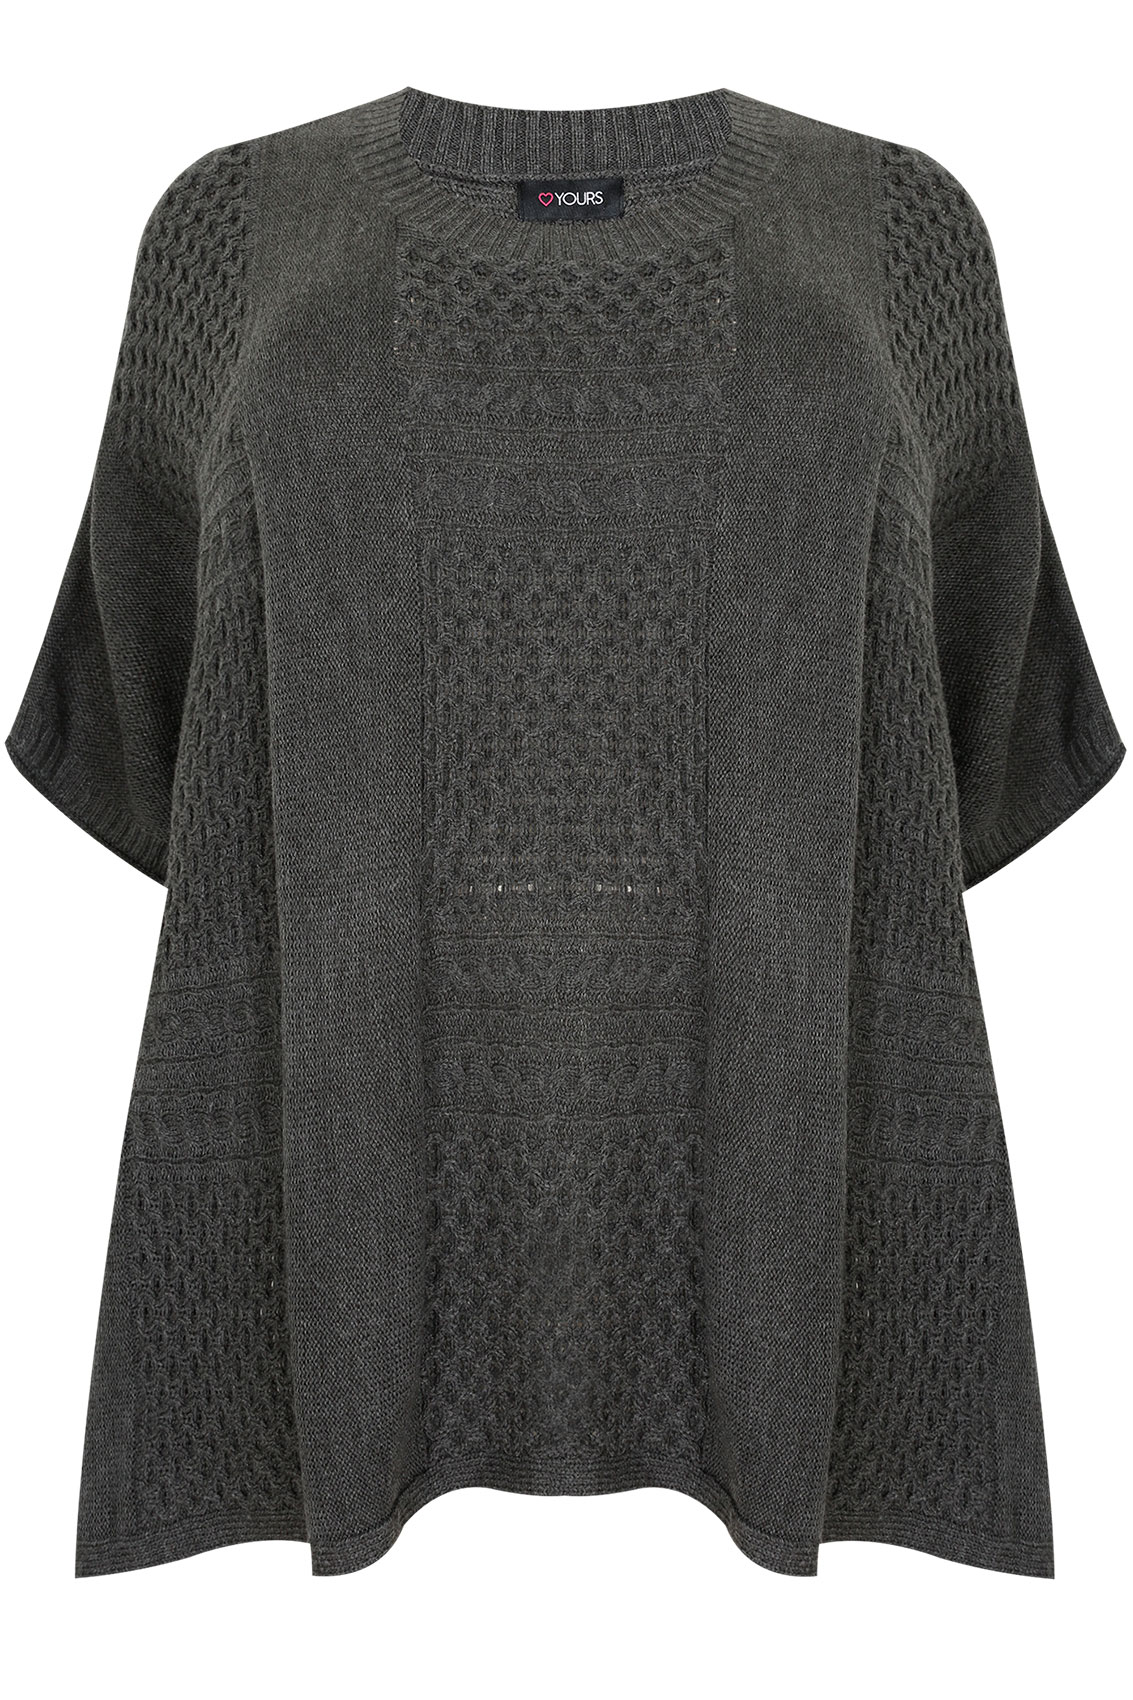 Charcoal Grey Tabard With Patchwork Stitch , Plus Size 16 to 32